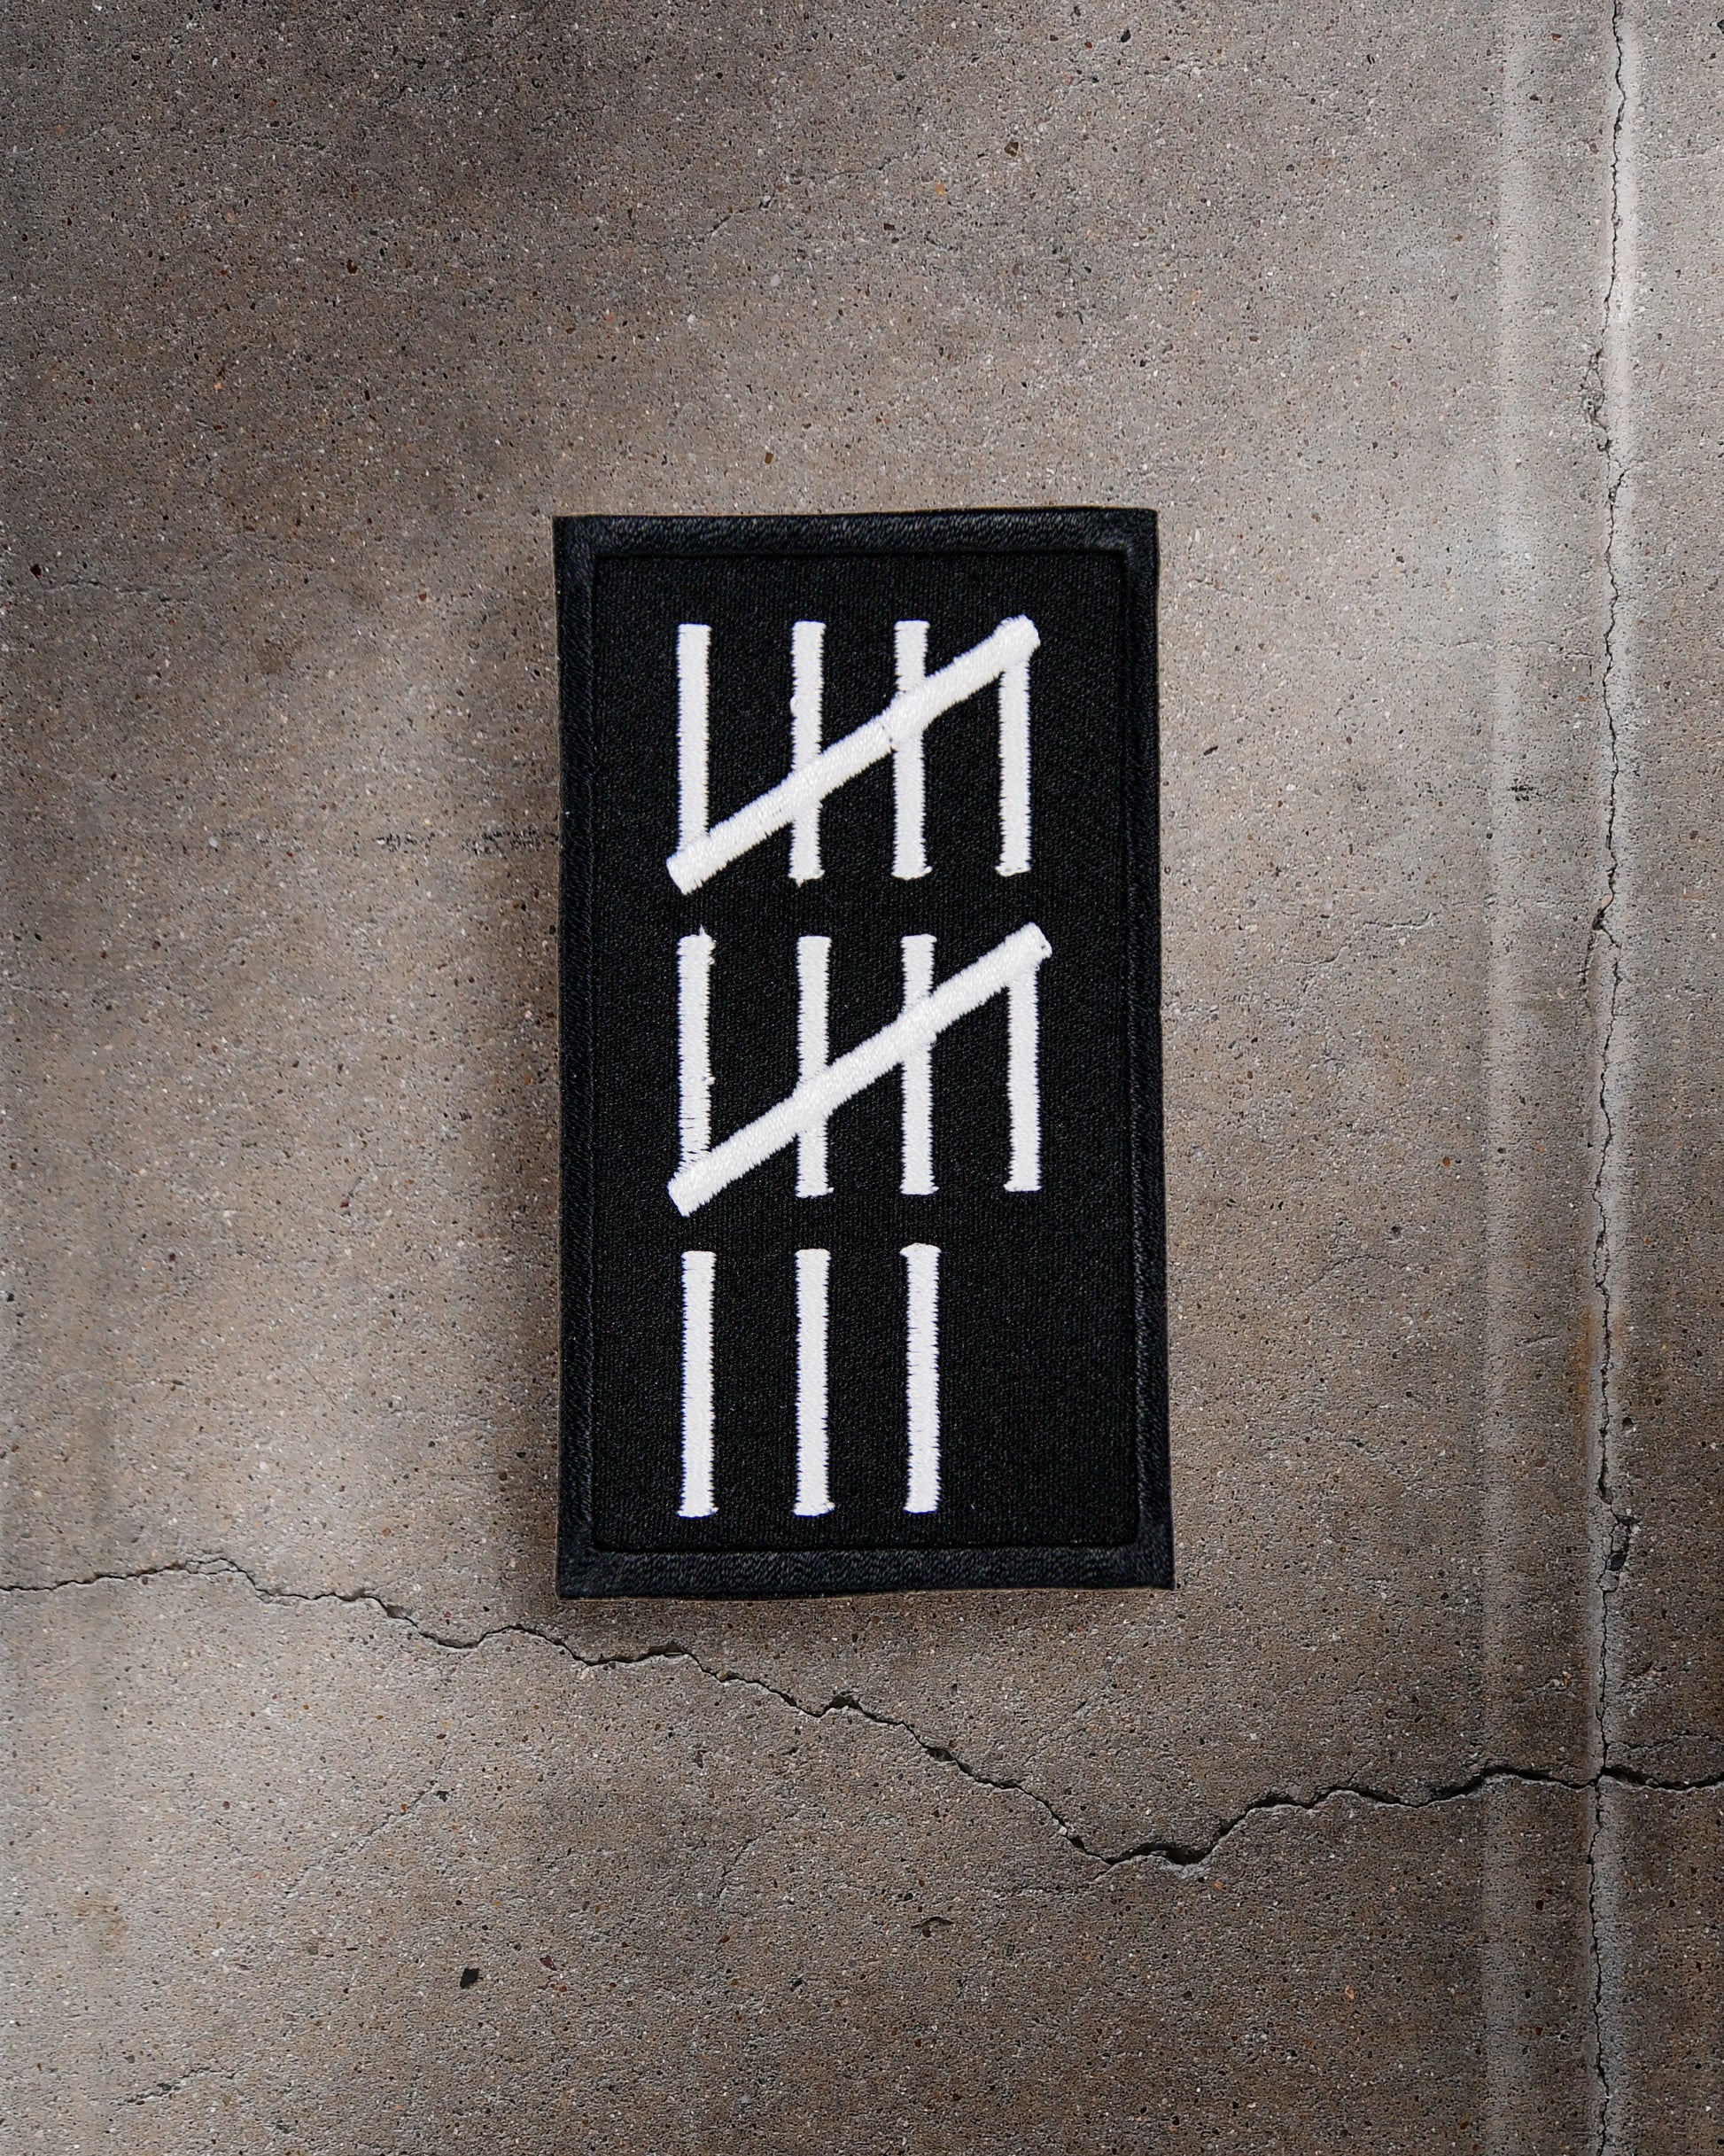 The 13th Amendment - Tally Marks Embroidered Iron On Patch 